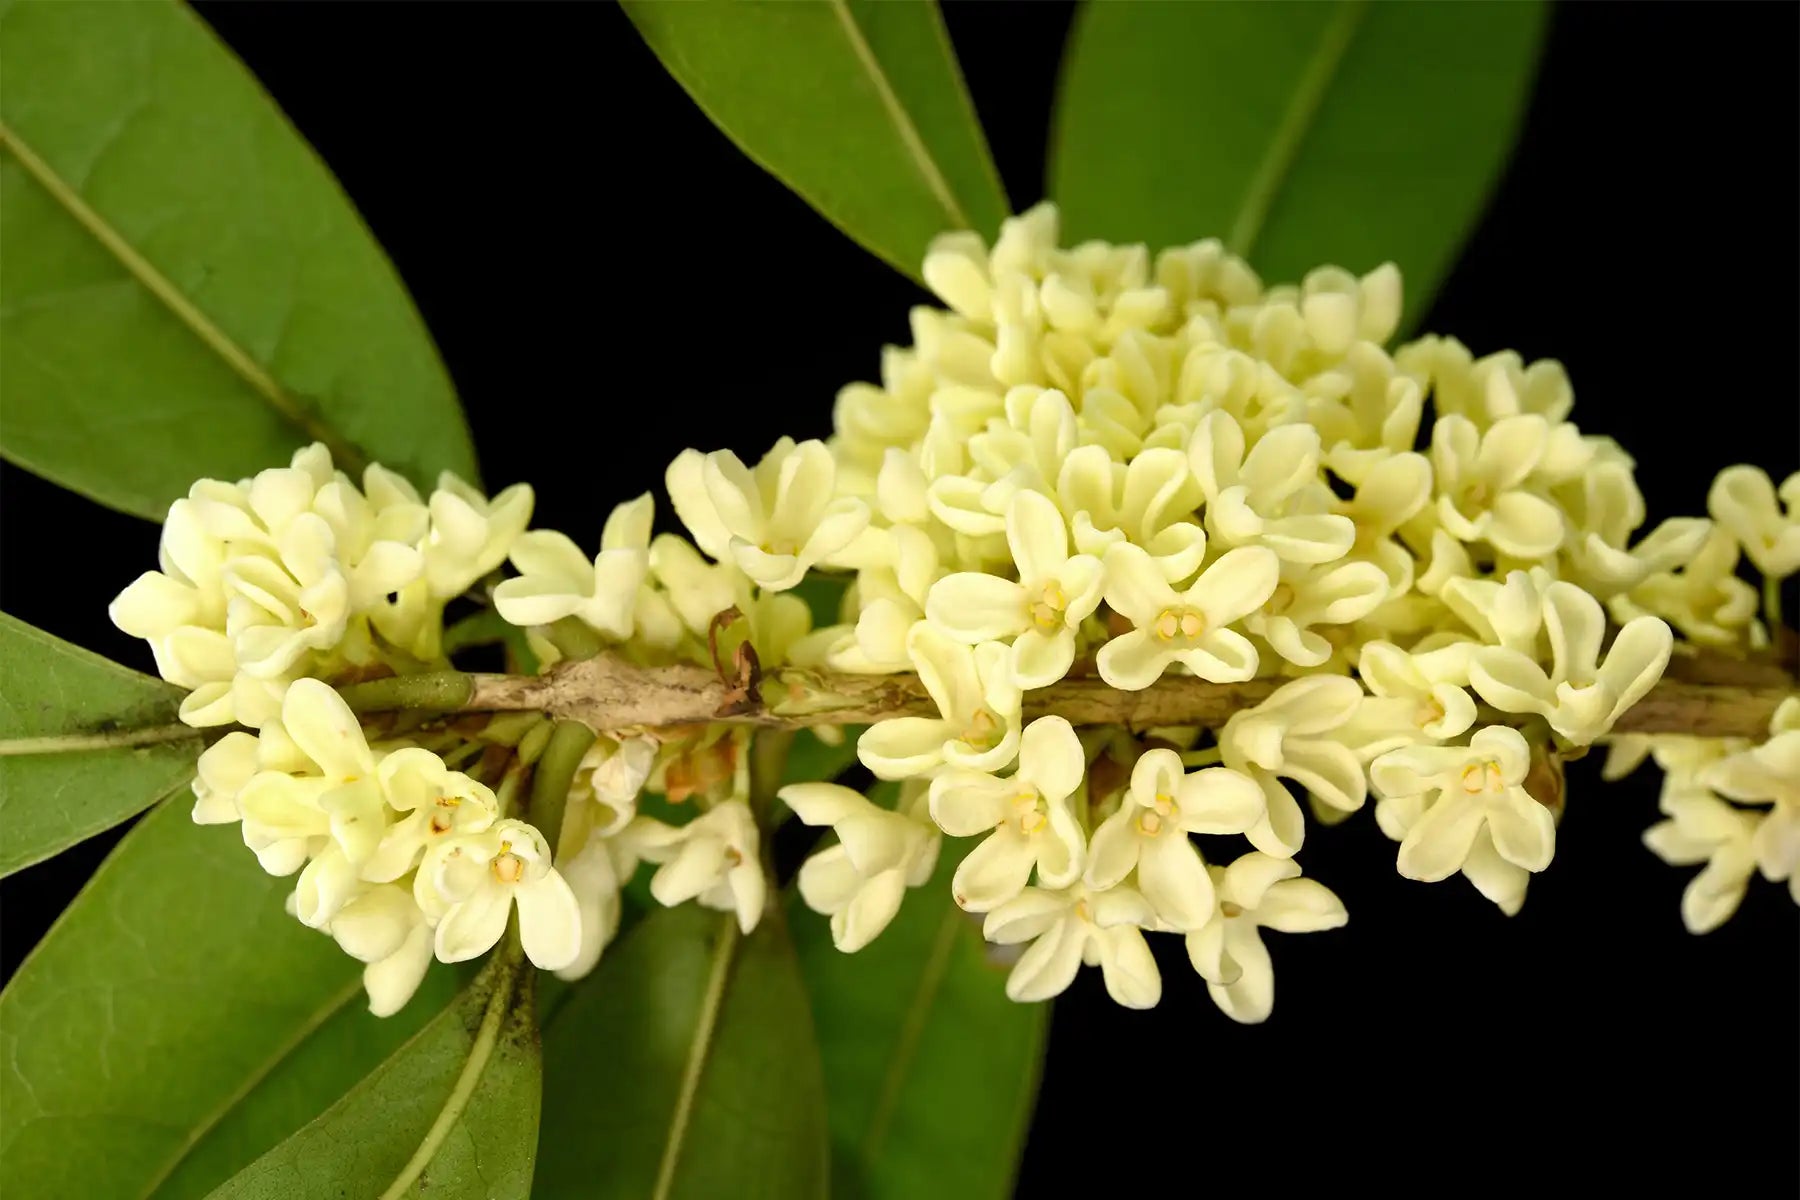 This Osmanthus Fragrans flower in close-up is creamy white. The tiny blossoms fill the air with their sweet fragrance.